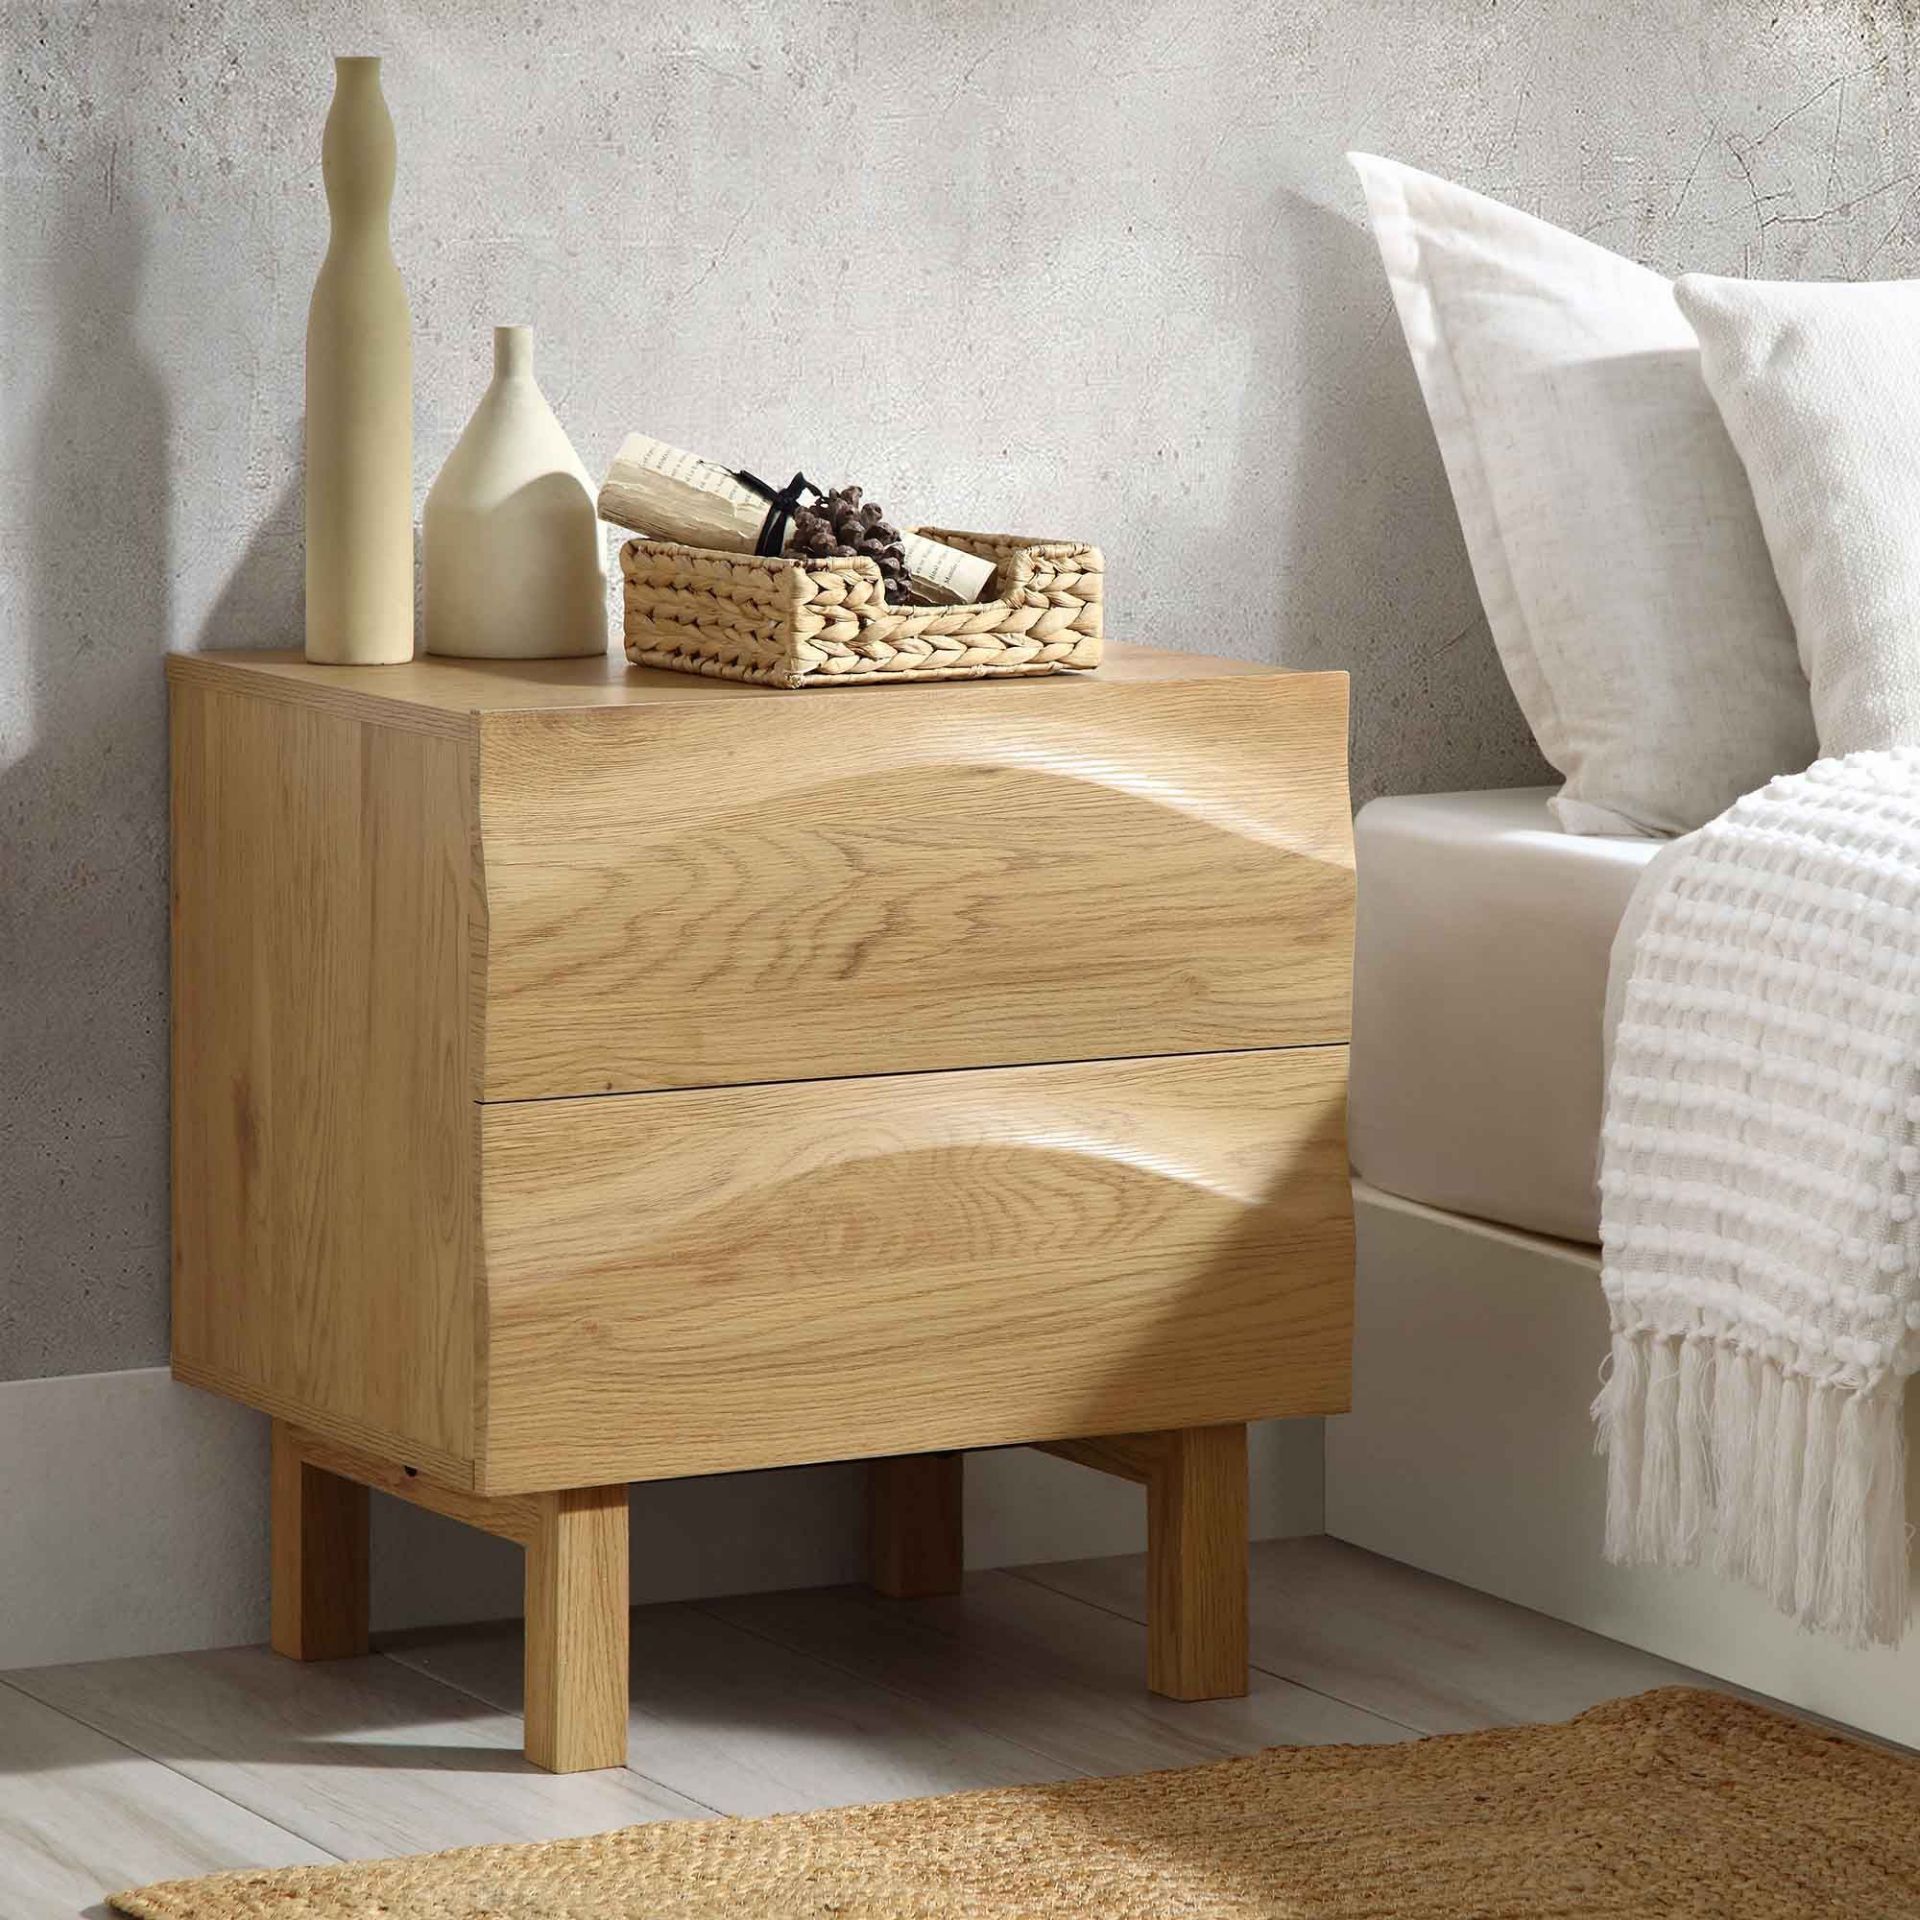 Moriko 2 Drawer Bedside Table. - R14. RRP £199.99. The unique sculptural facade features flowing